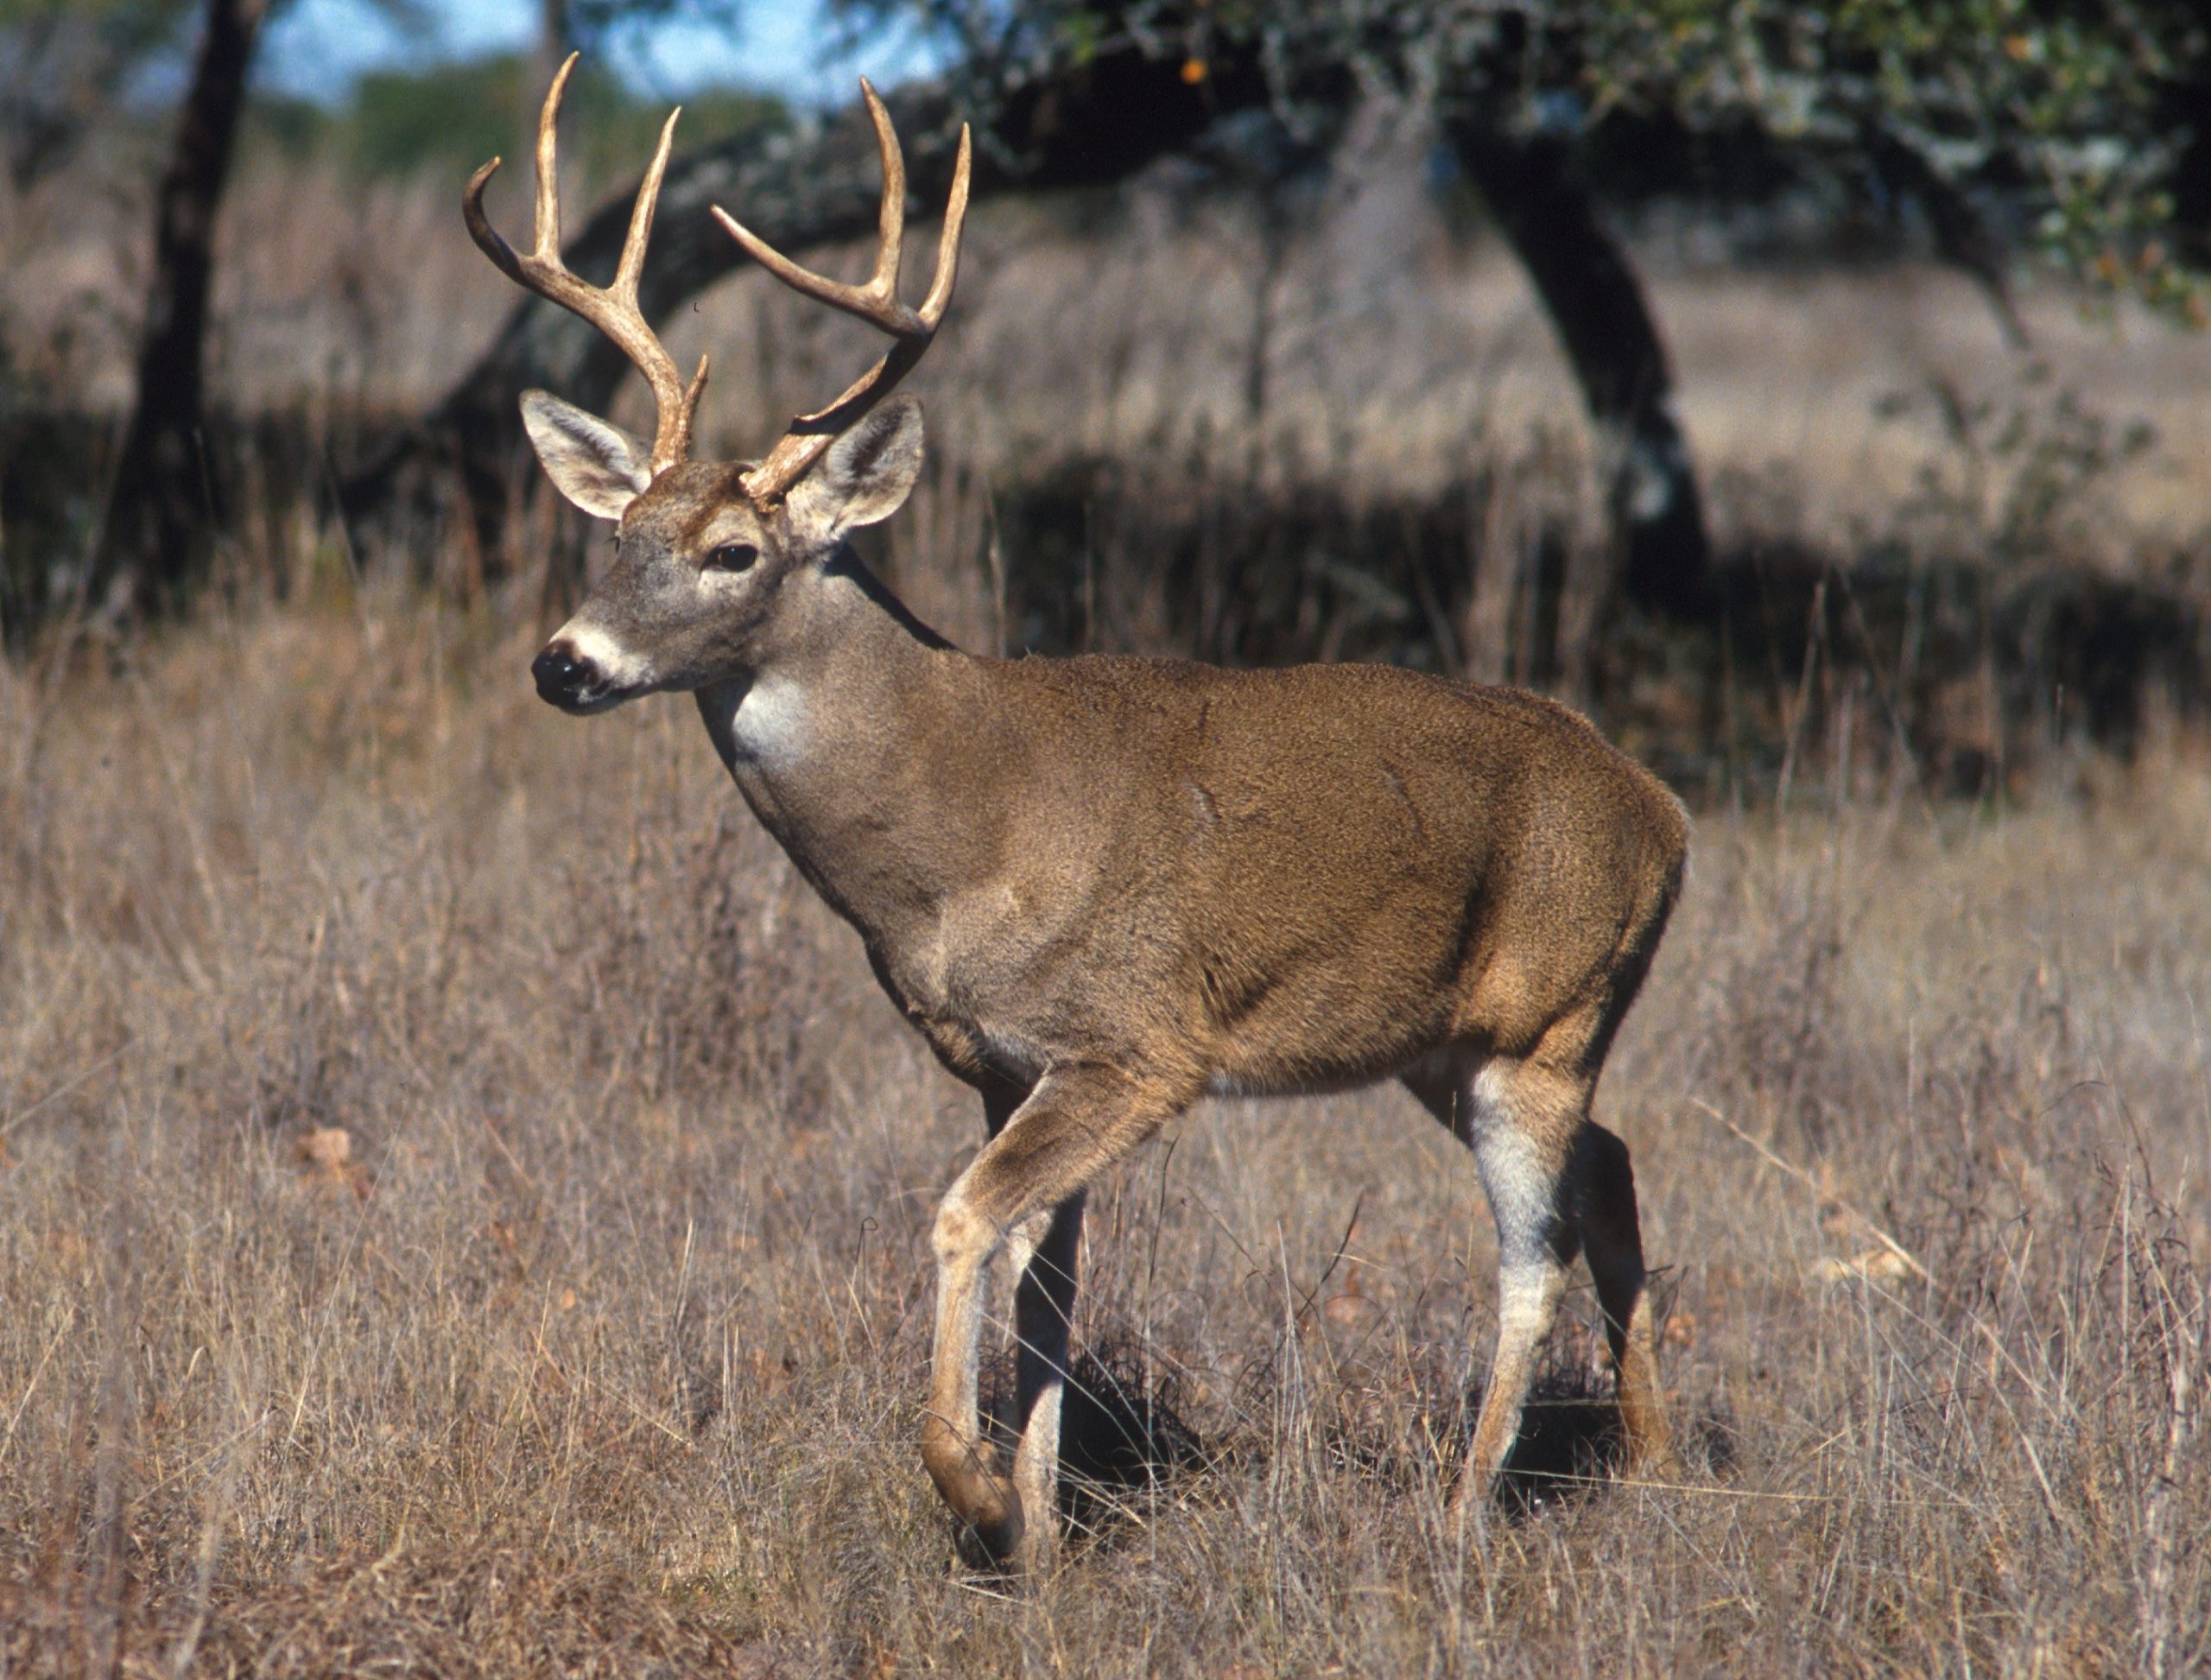 Pth - How Has The Warm Weather Affected Hunting Season For You?  2021 Deer Rut Report Missouri